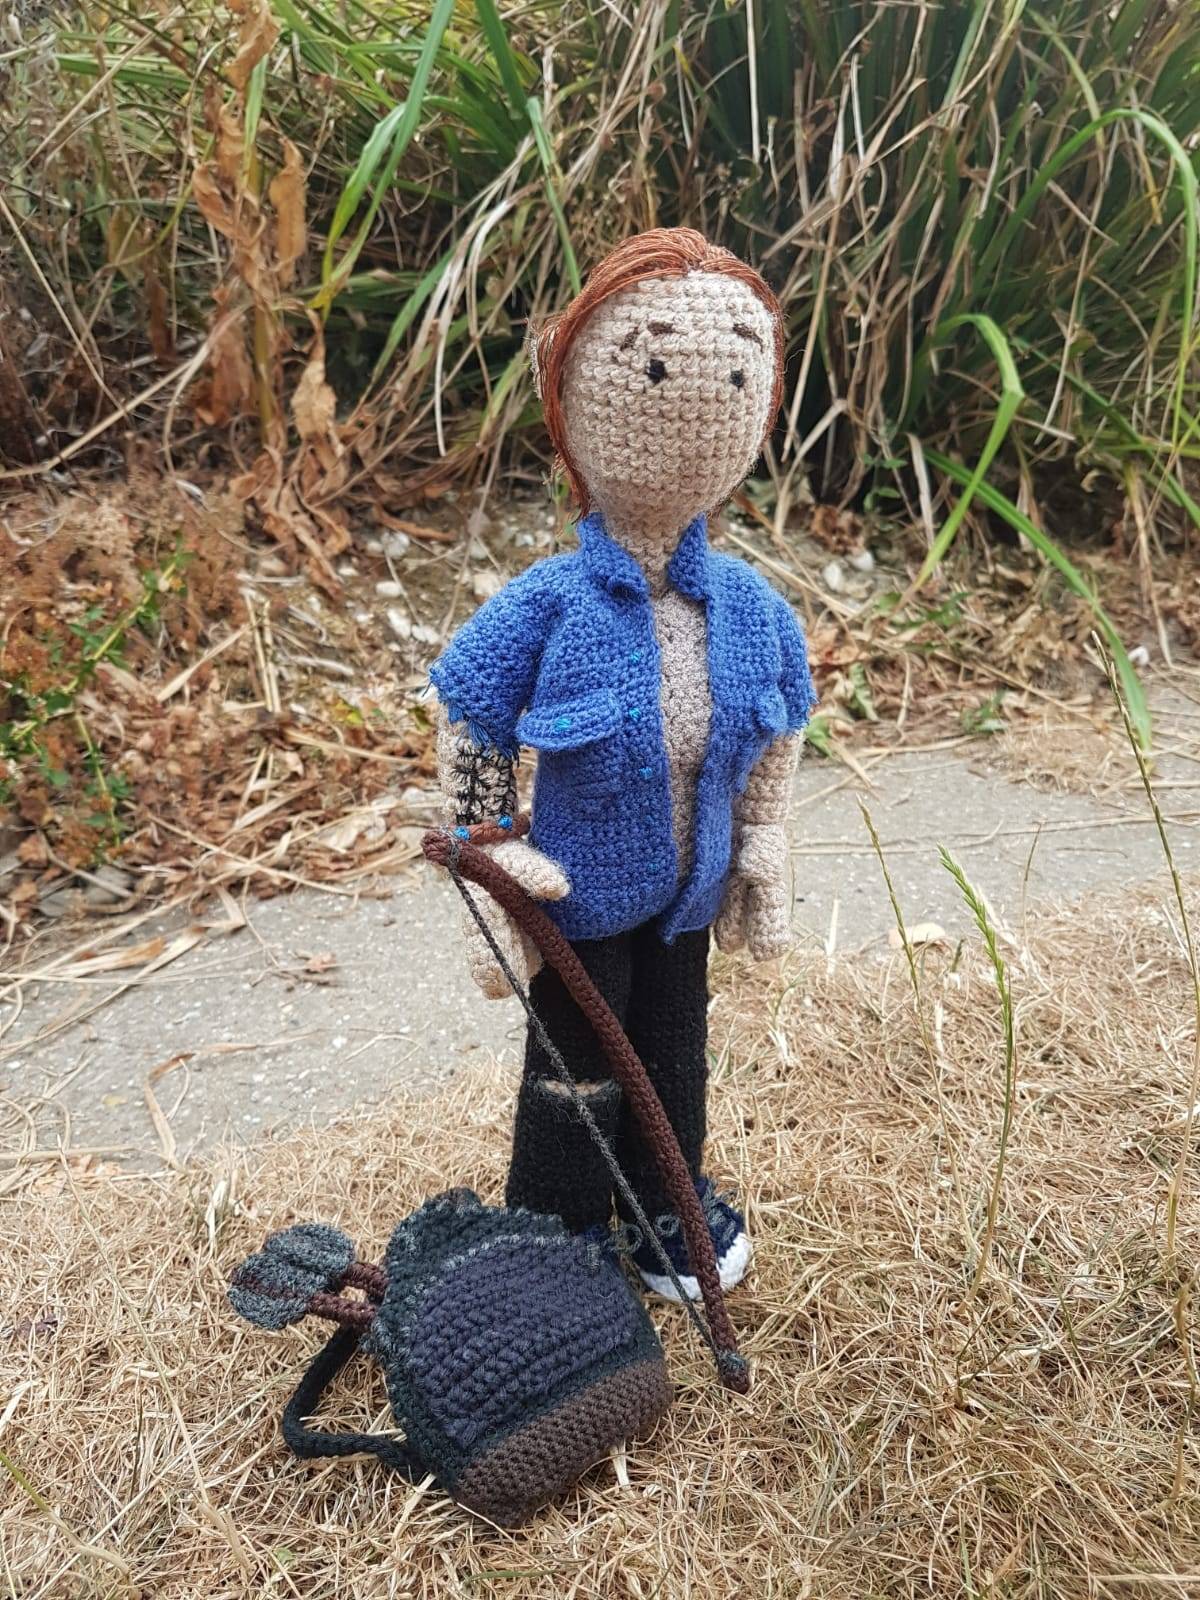 Crochet Ellie - the last of us 2 by Judith S. - Naughty Dog